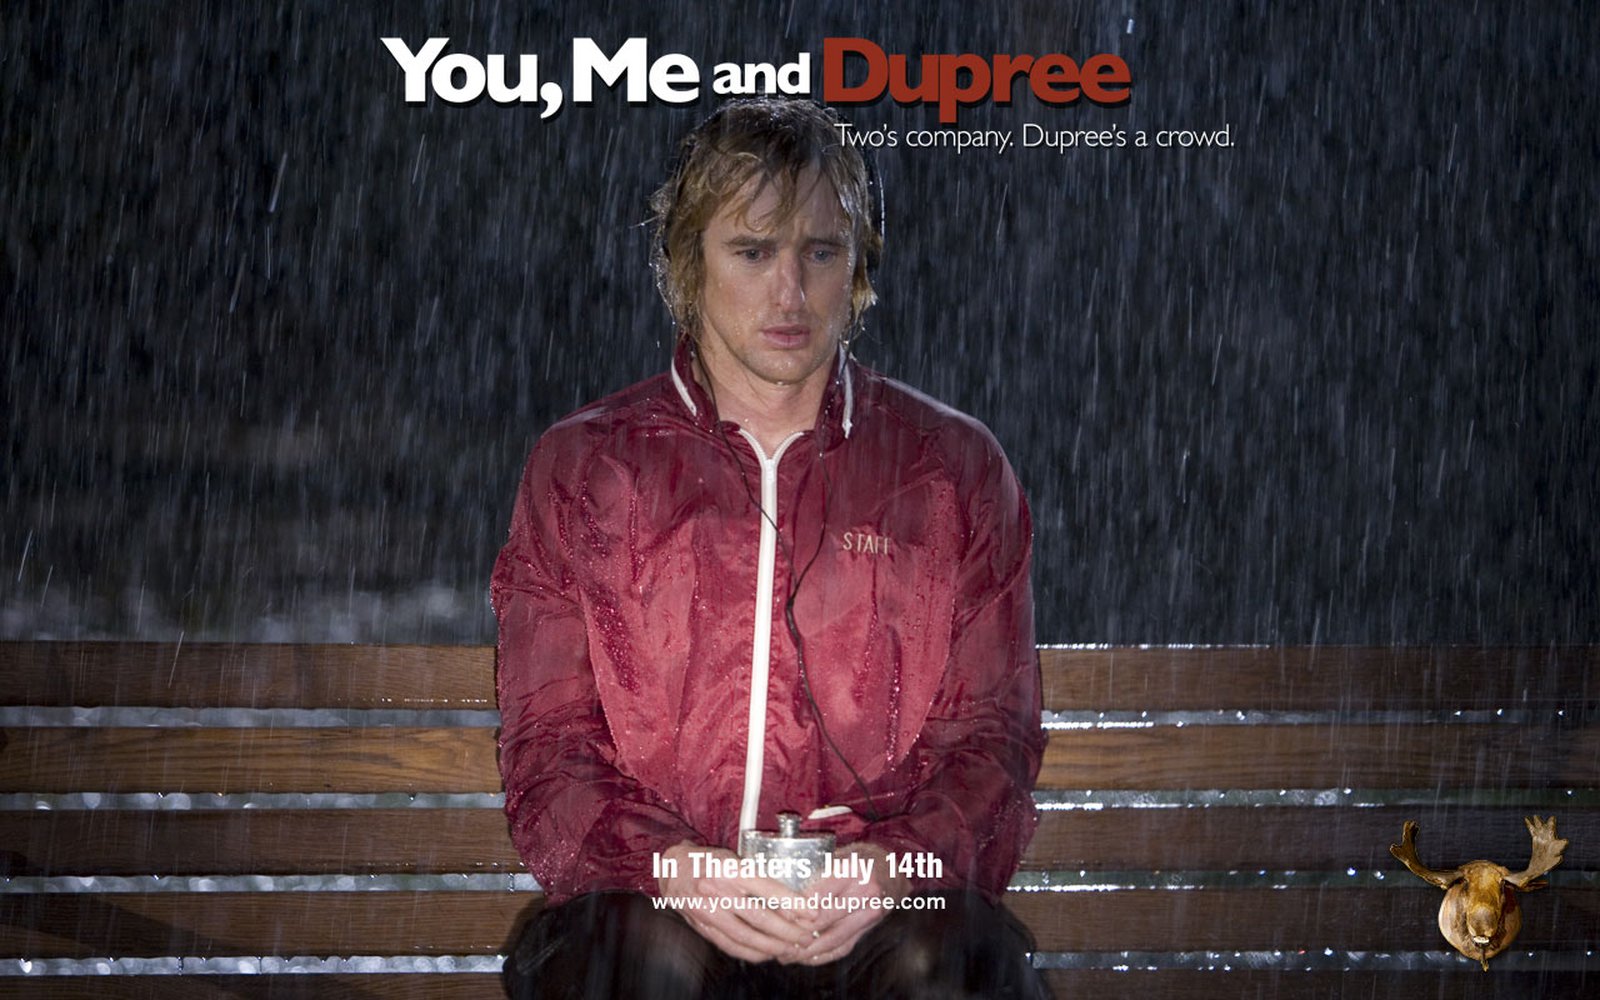 You and me and he. Owen Wilson you me and Dupree. Он я и его друзья.